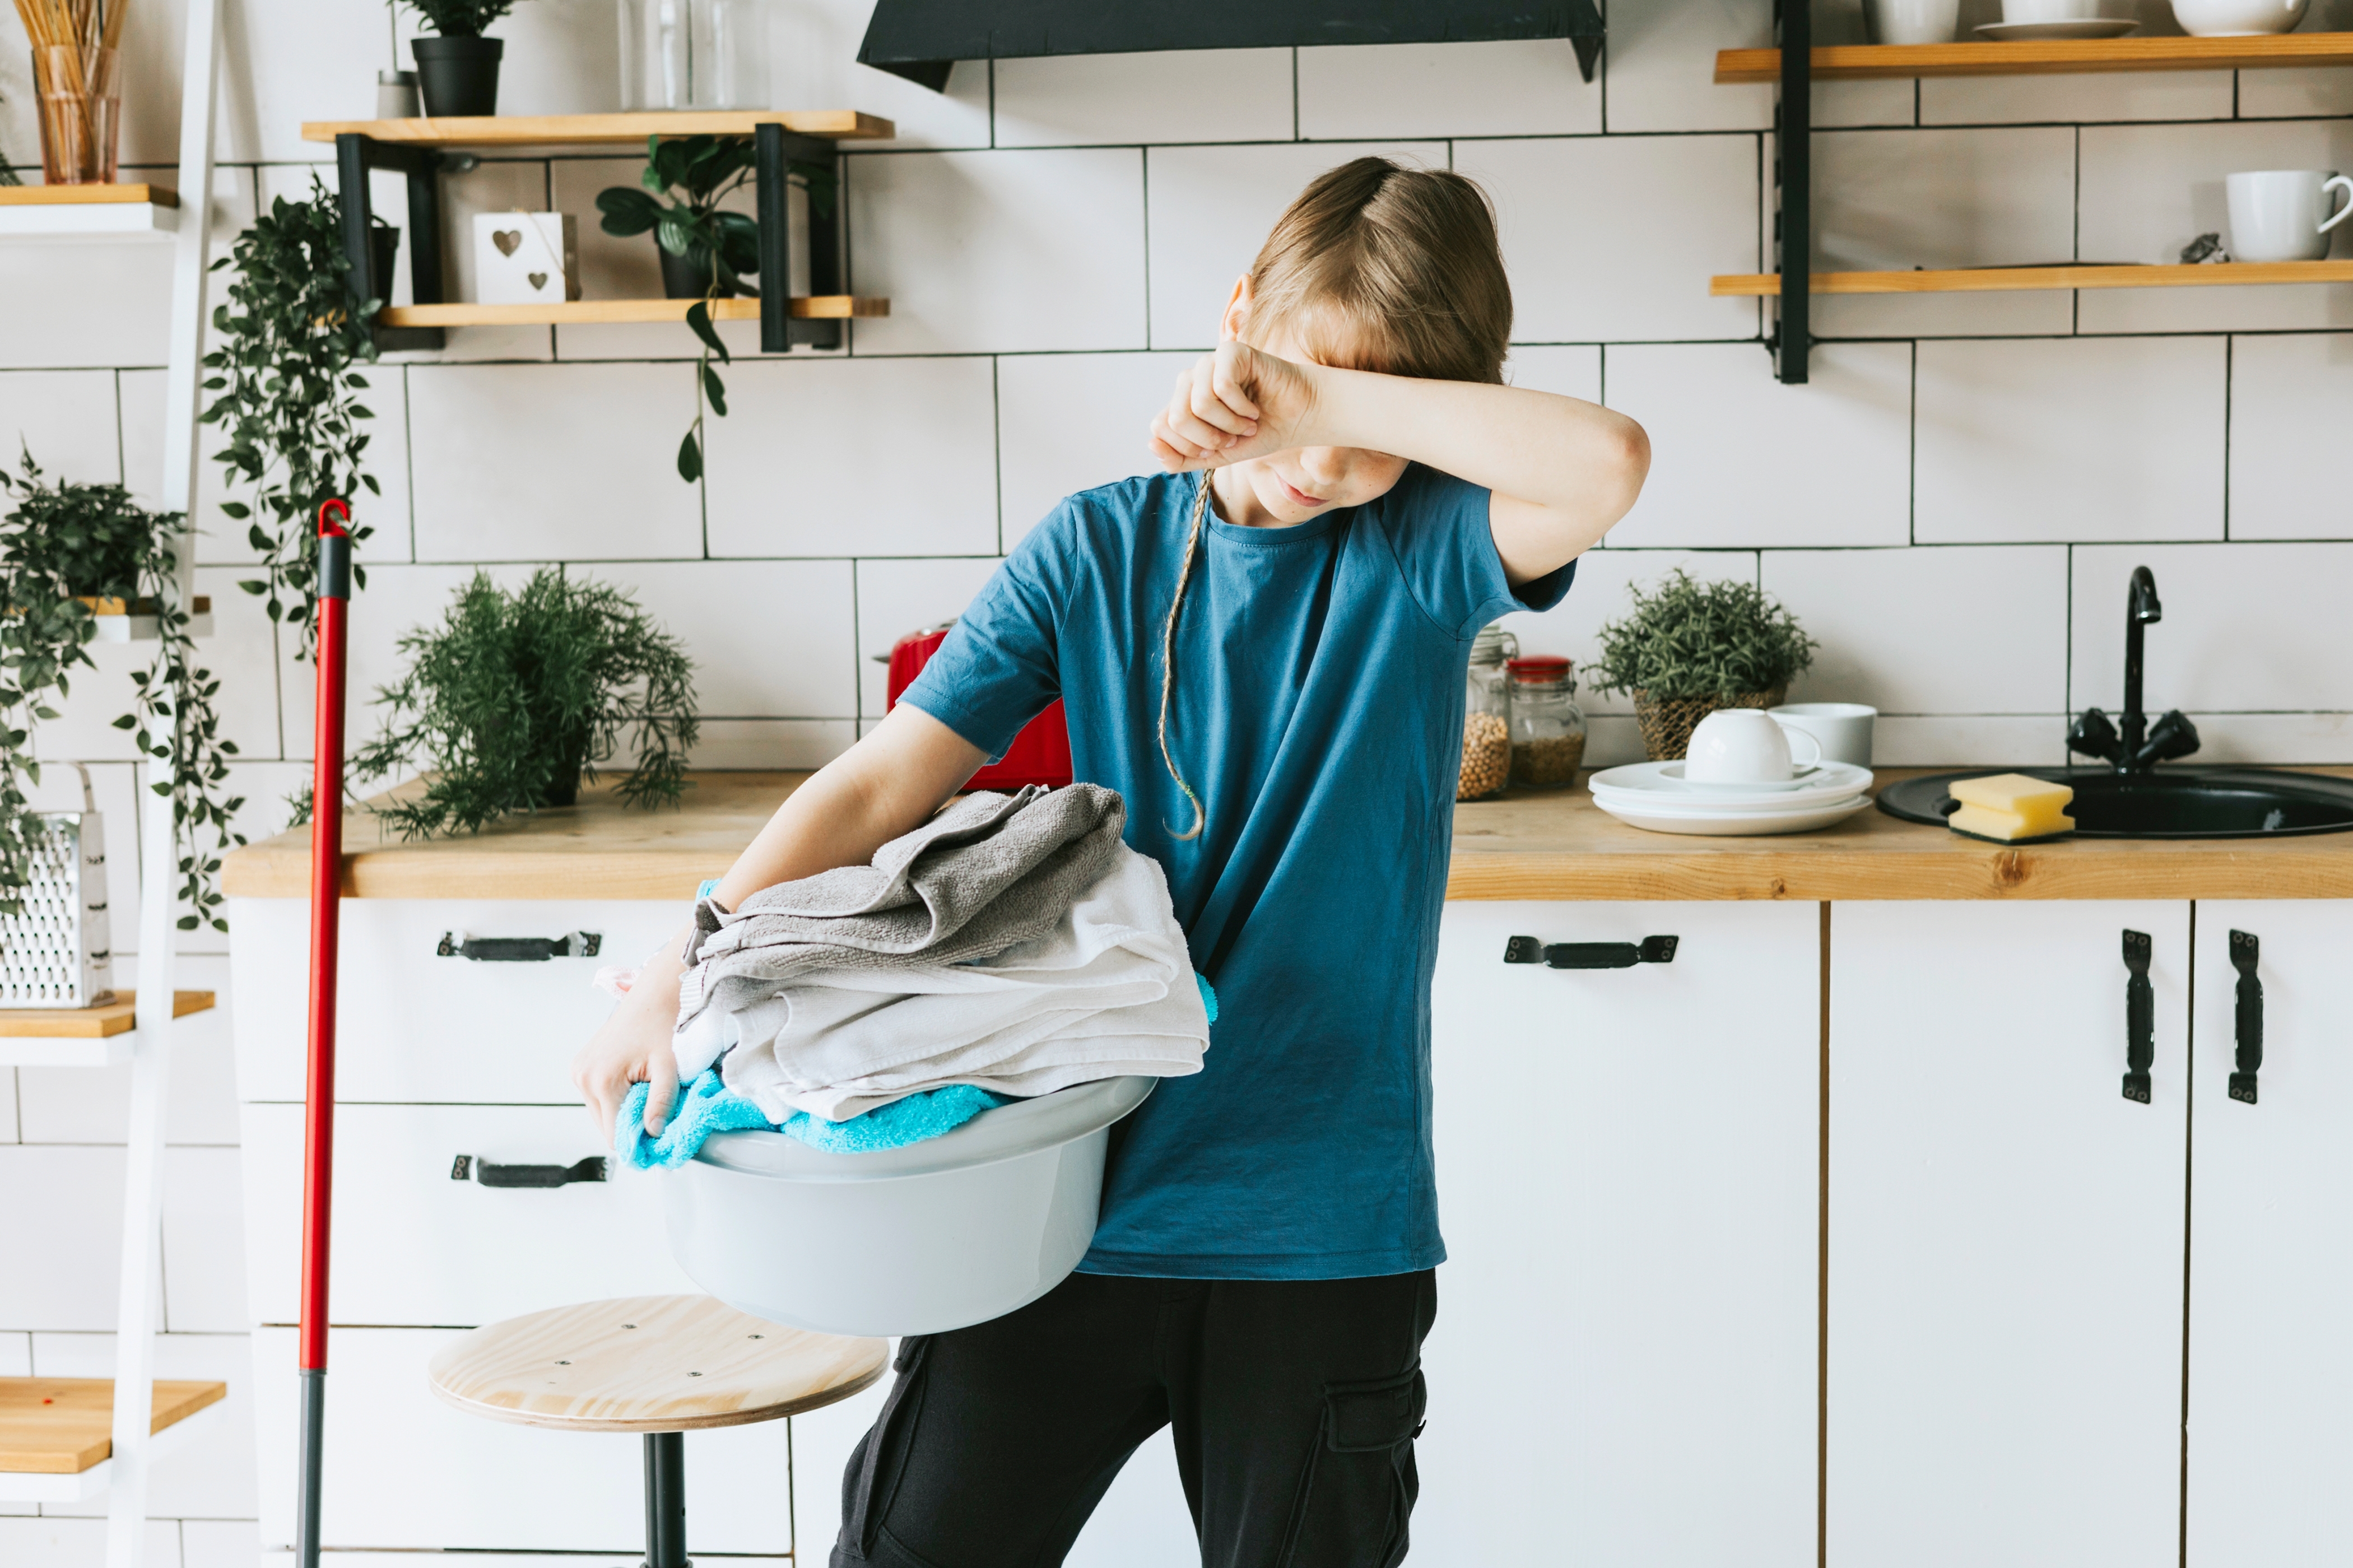 Young boy carrying a laundry basket | Source: Shutterstock